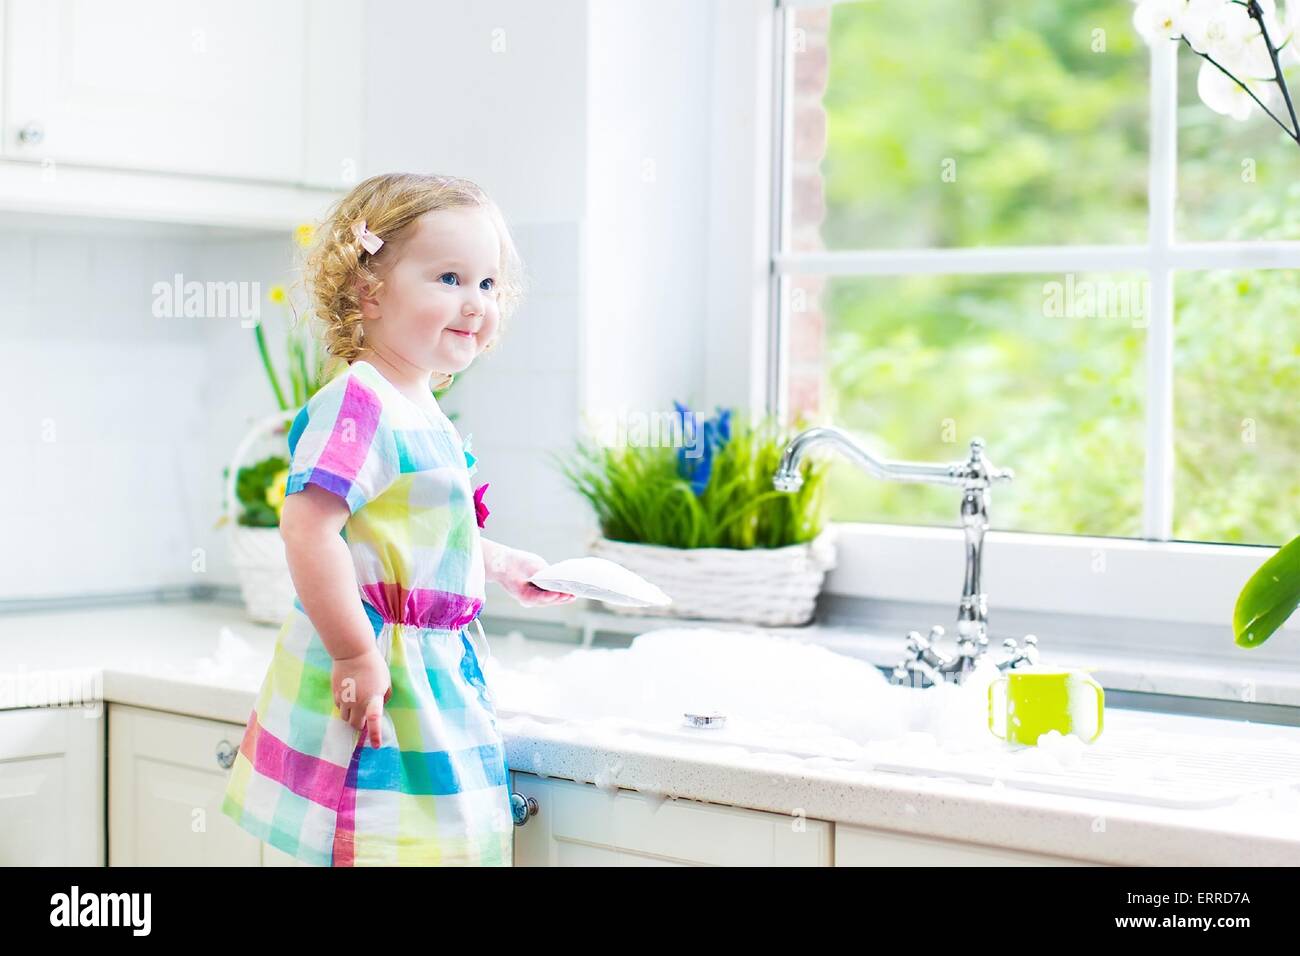 Cute curly toddler girl in a colorful dress washing dishes, cleaning with a sponge and playing with foam in the sink Stock Photo